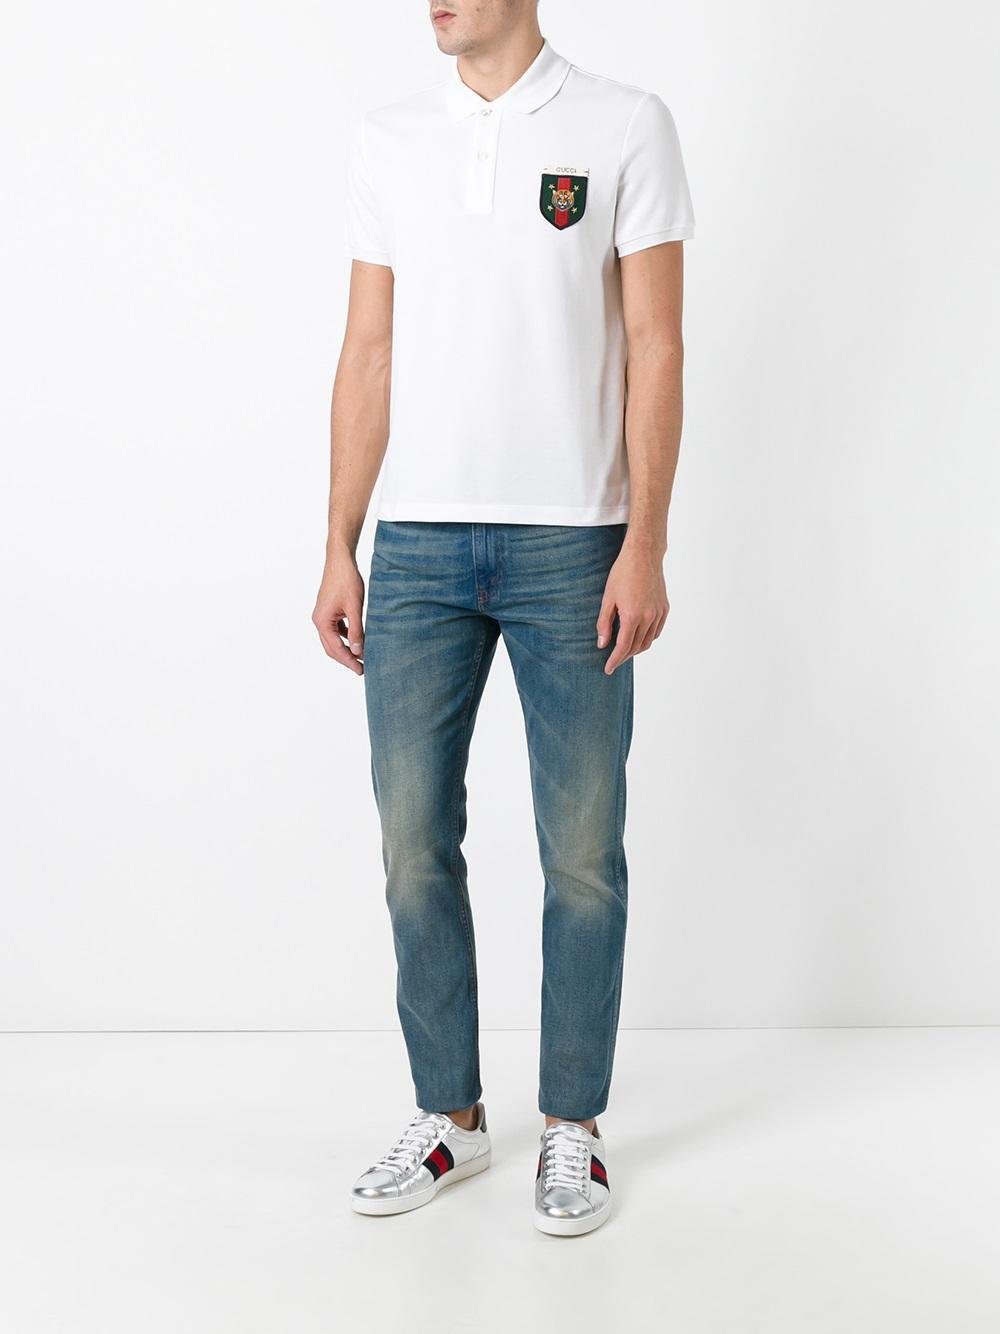 Gucci Web Tiger Crest Polo Shirt in White for Men | Lyst